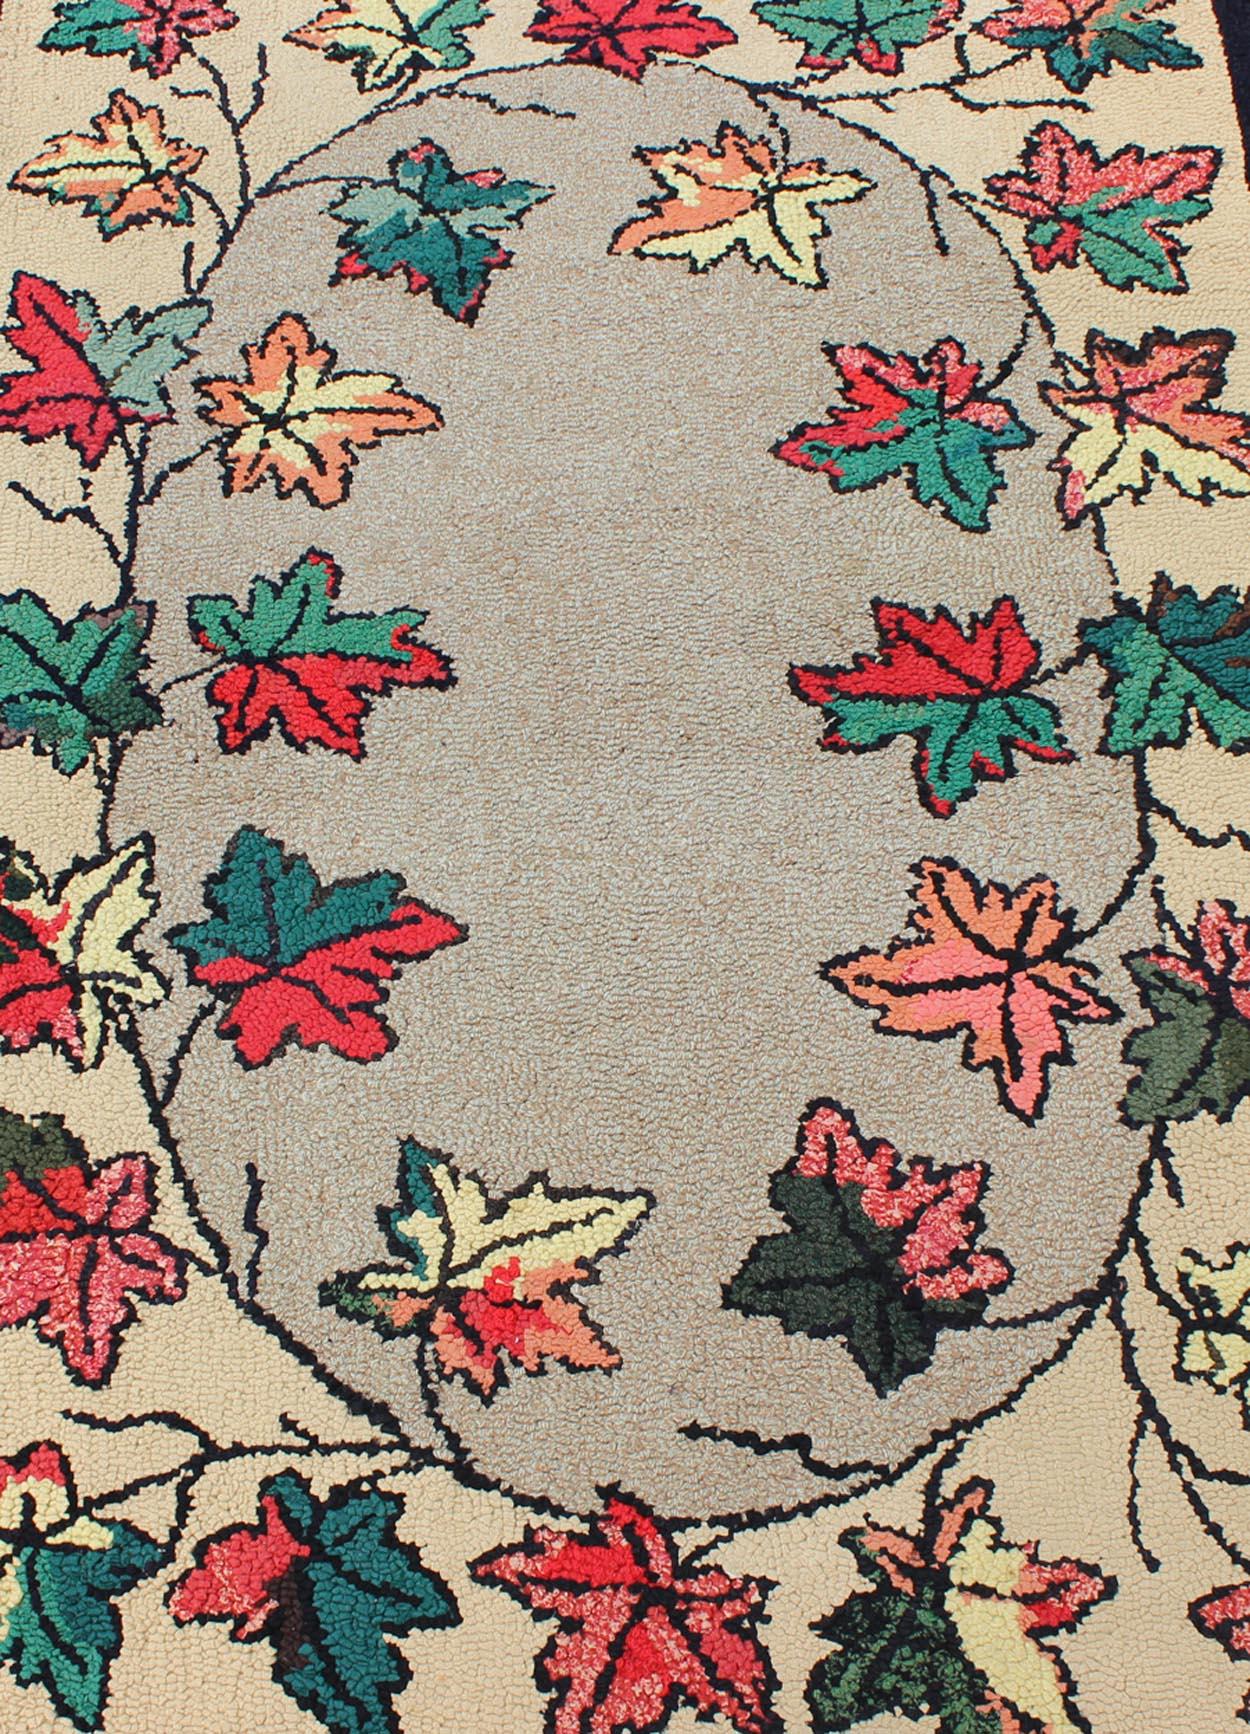 Leaf Design American Hooked Rug in Red, Green, and Charcoal Outlines In Good Condition For Sale In Atlanta, GA